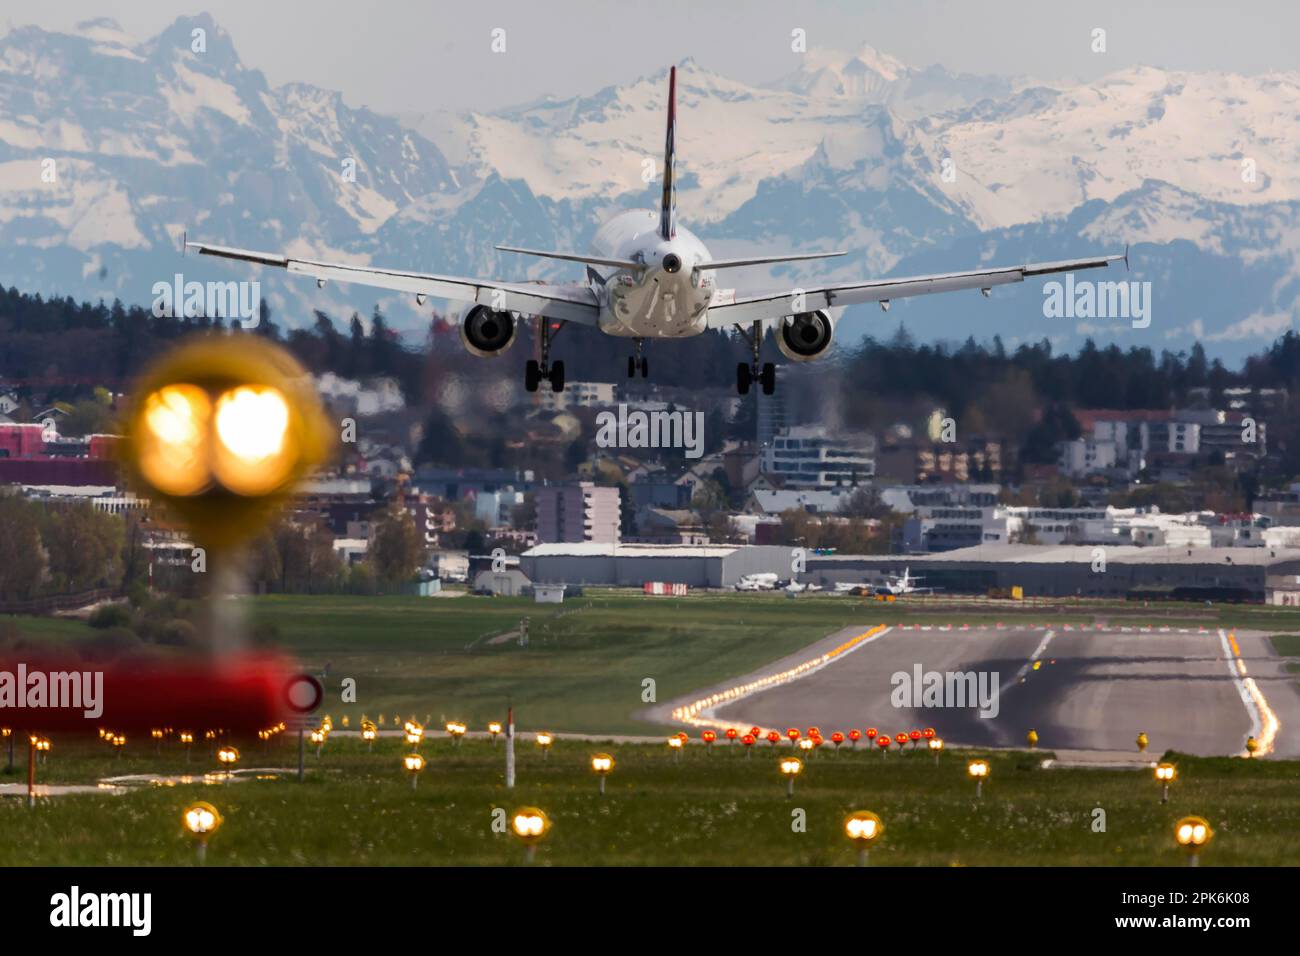 Aircraft on landing, airline Edelweiss Air, Airbus A320-214, snow-covered Alps, ZRH airport, Zurich, Switzerland Stock Photo